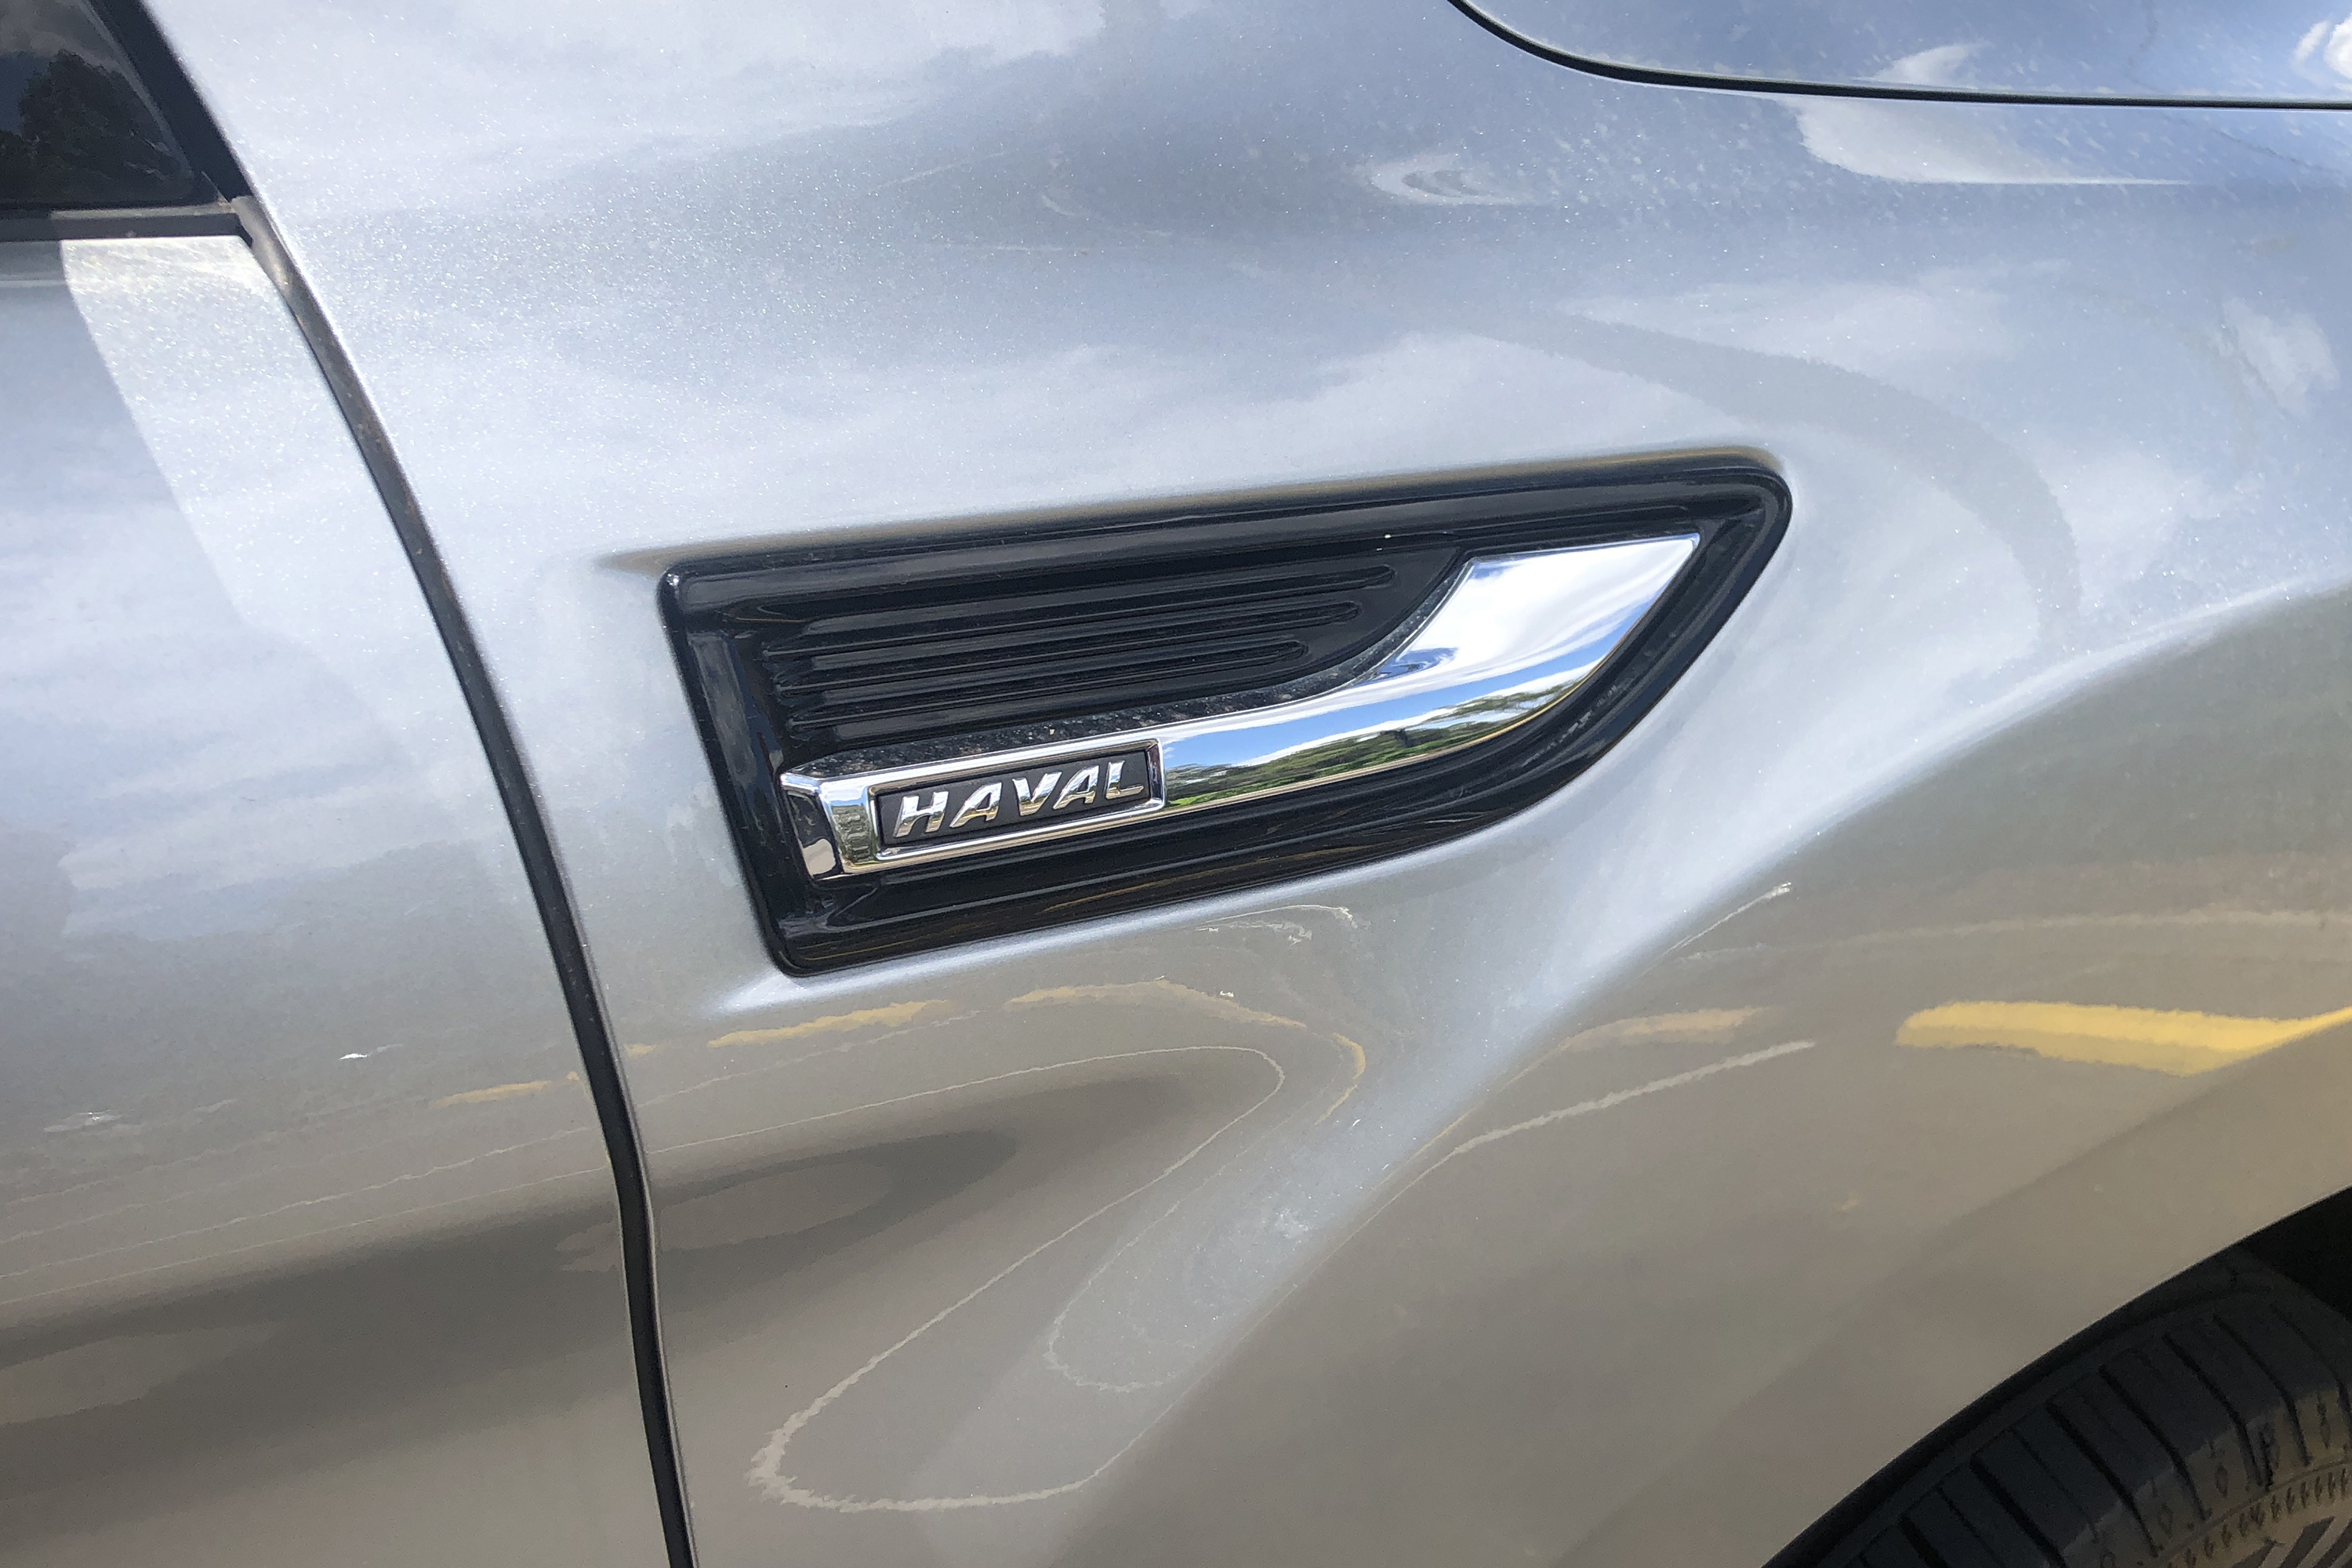 Haval logo on side of car cropped